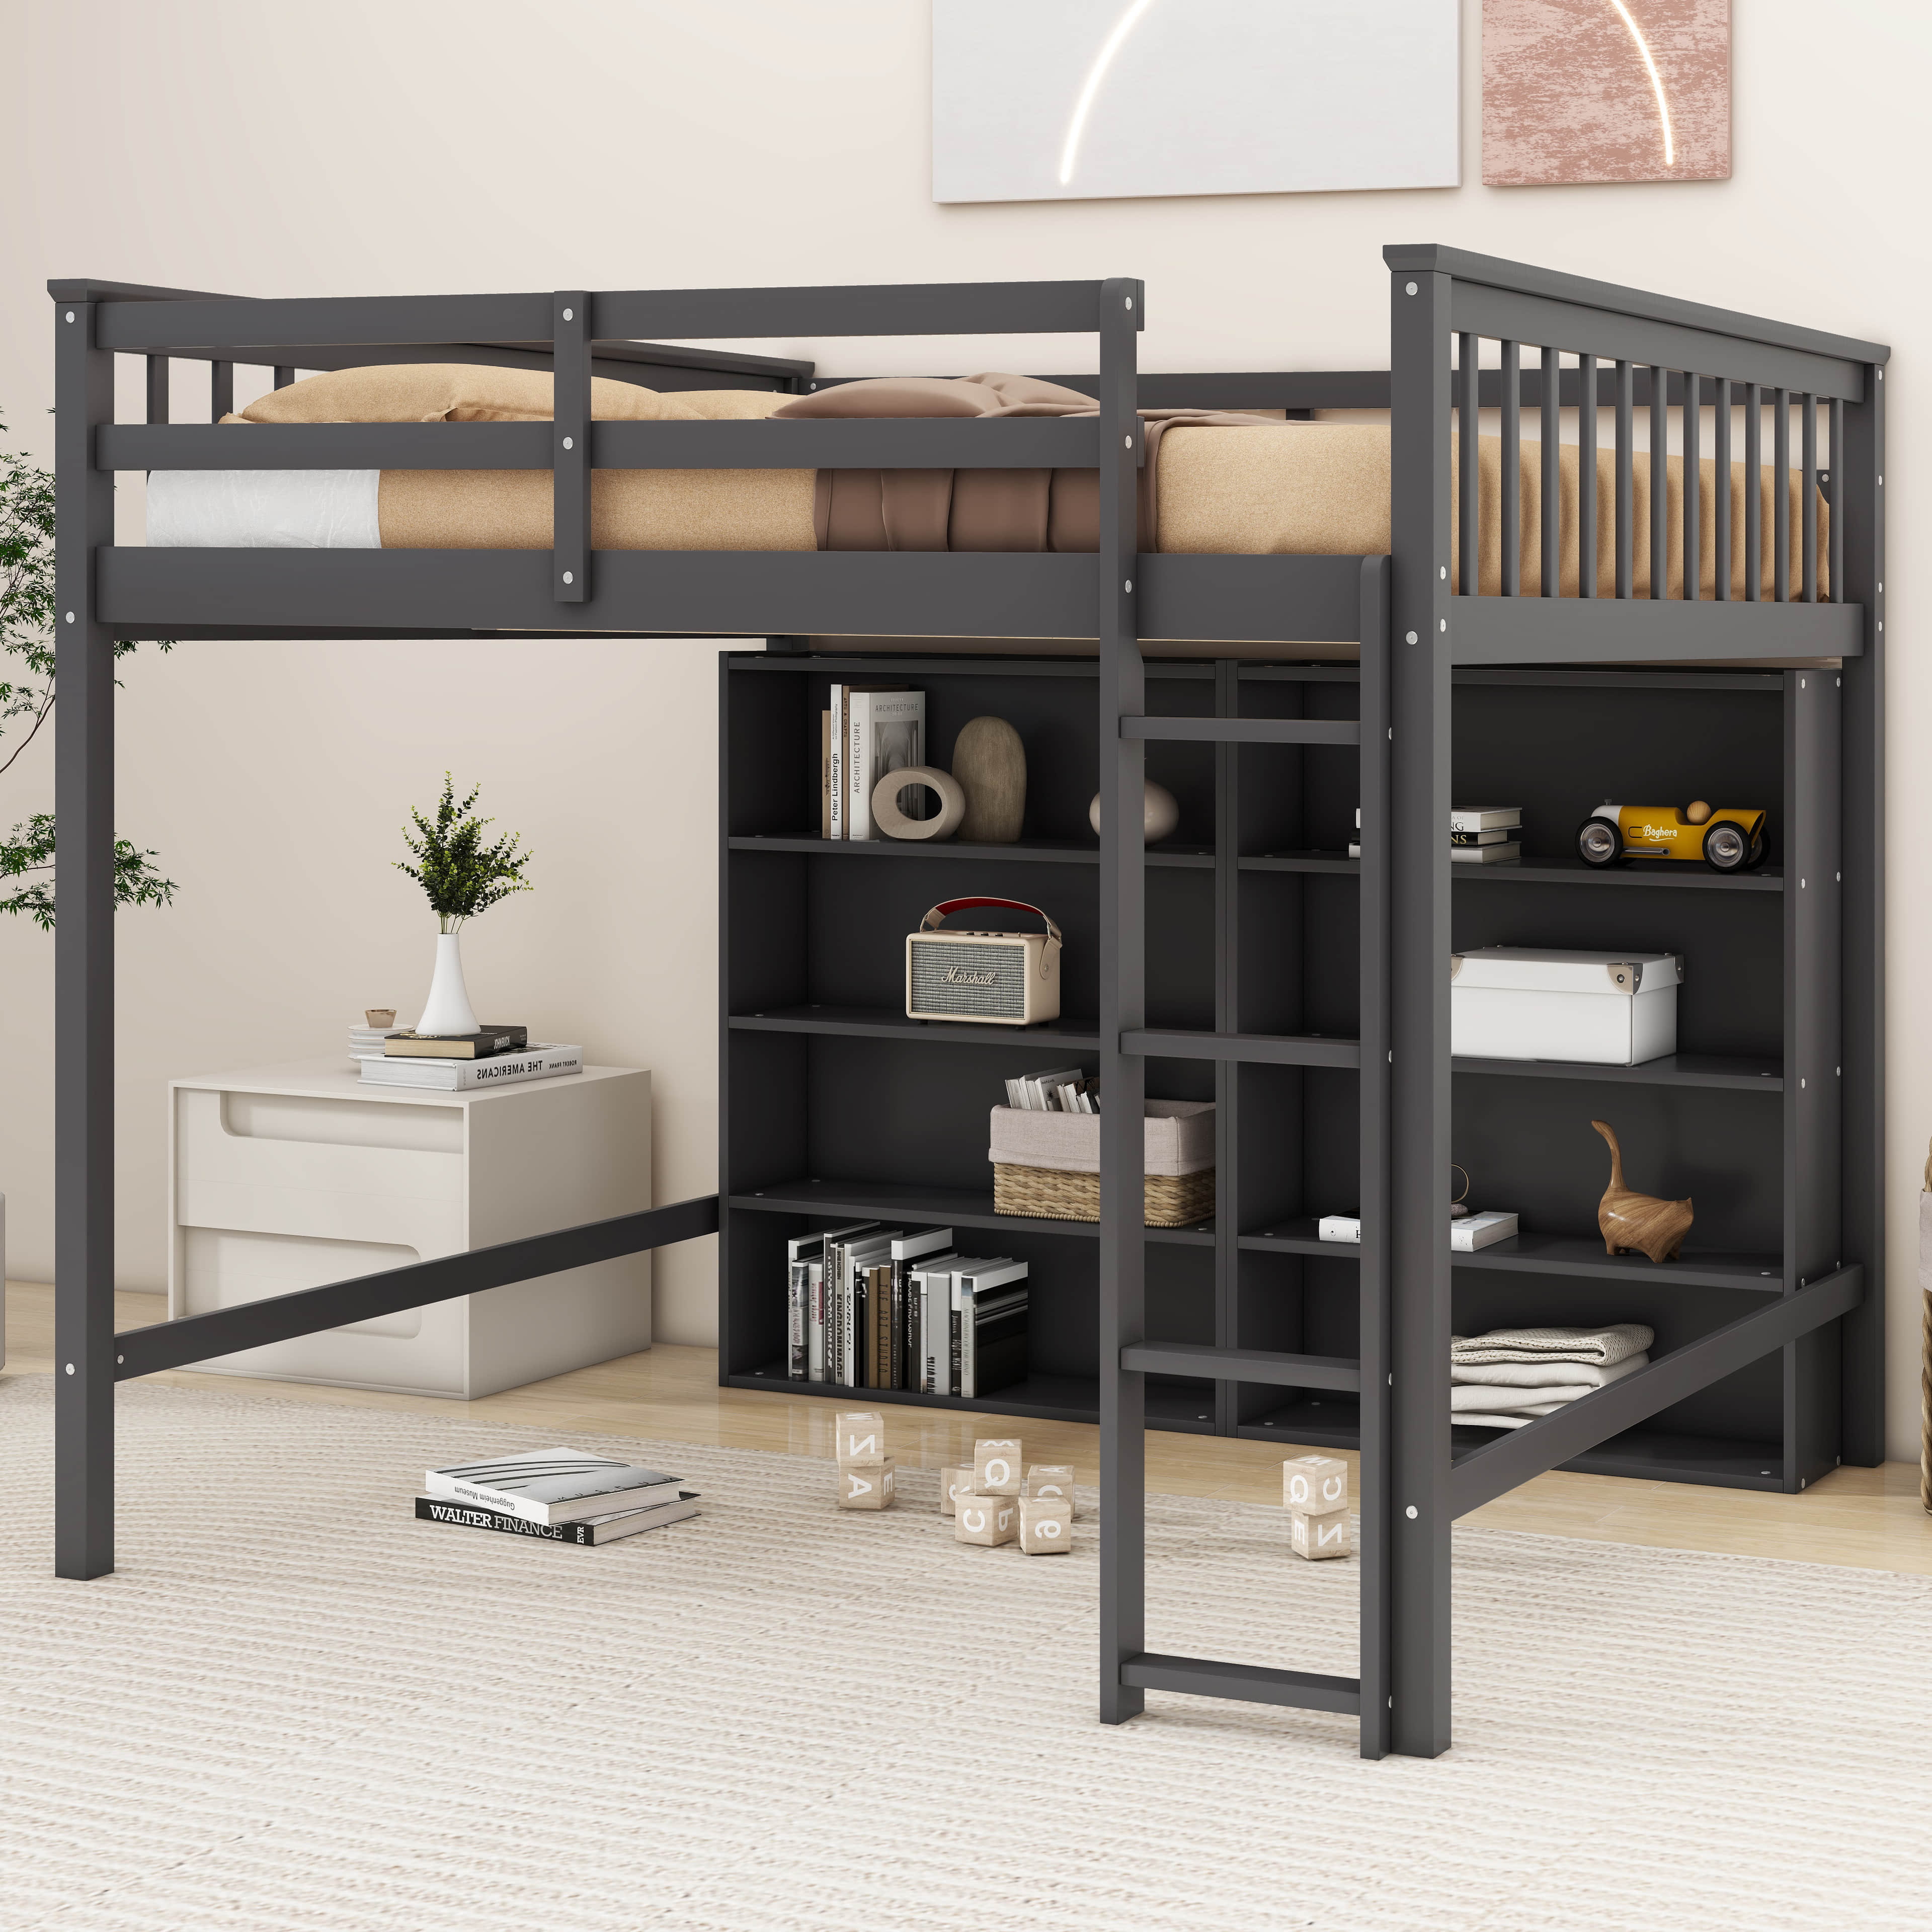 Harriet Bee Javeya Full Size Loft Bed with 8 Open Storage Shelves and ...